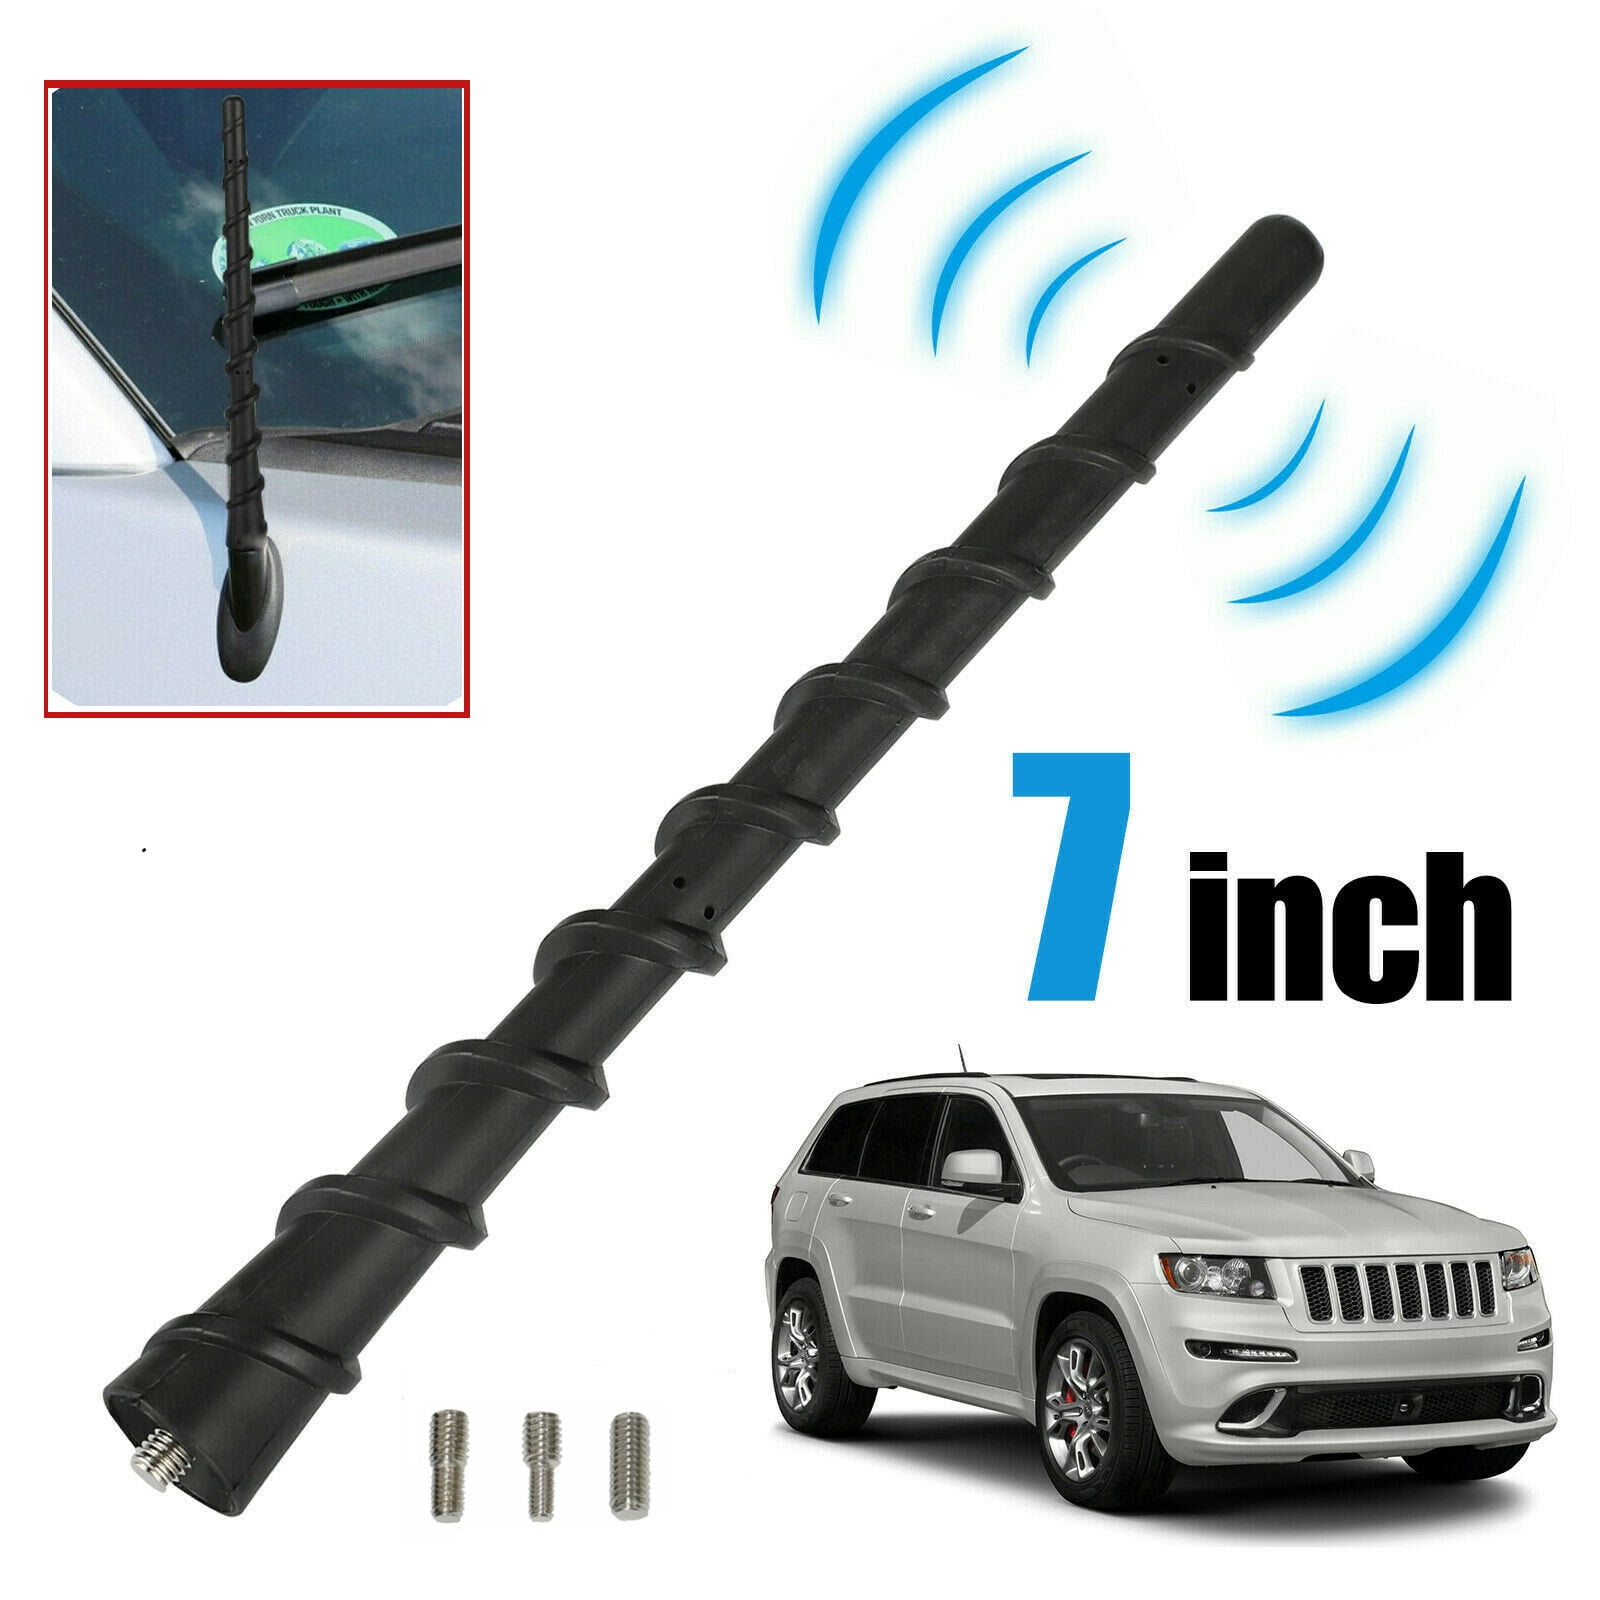 Car Antenna mast for 2011-2018 Jeep Wrangler Cherokee Dodge Journey-AM FM Copper Interface 7 inch 